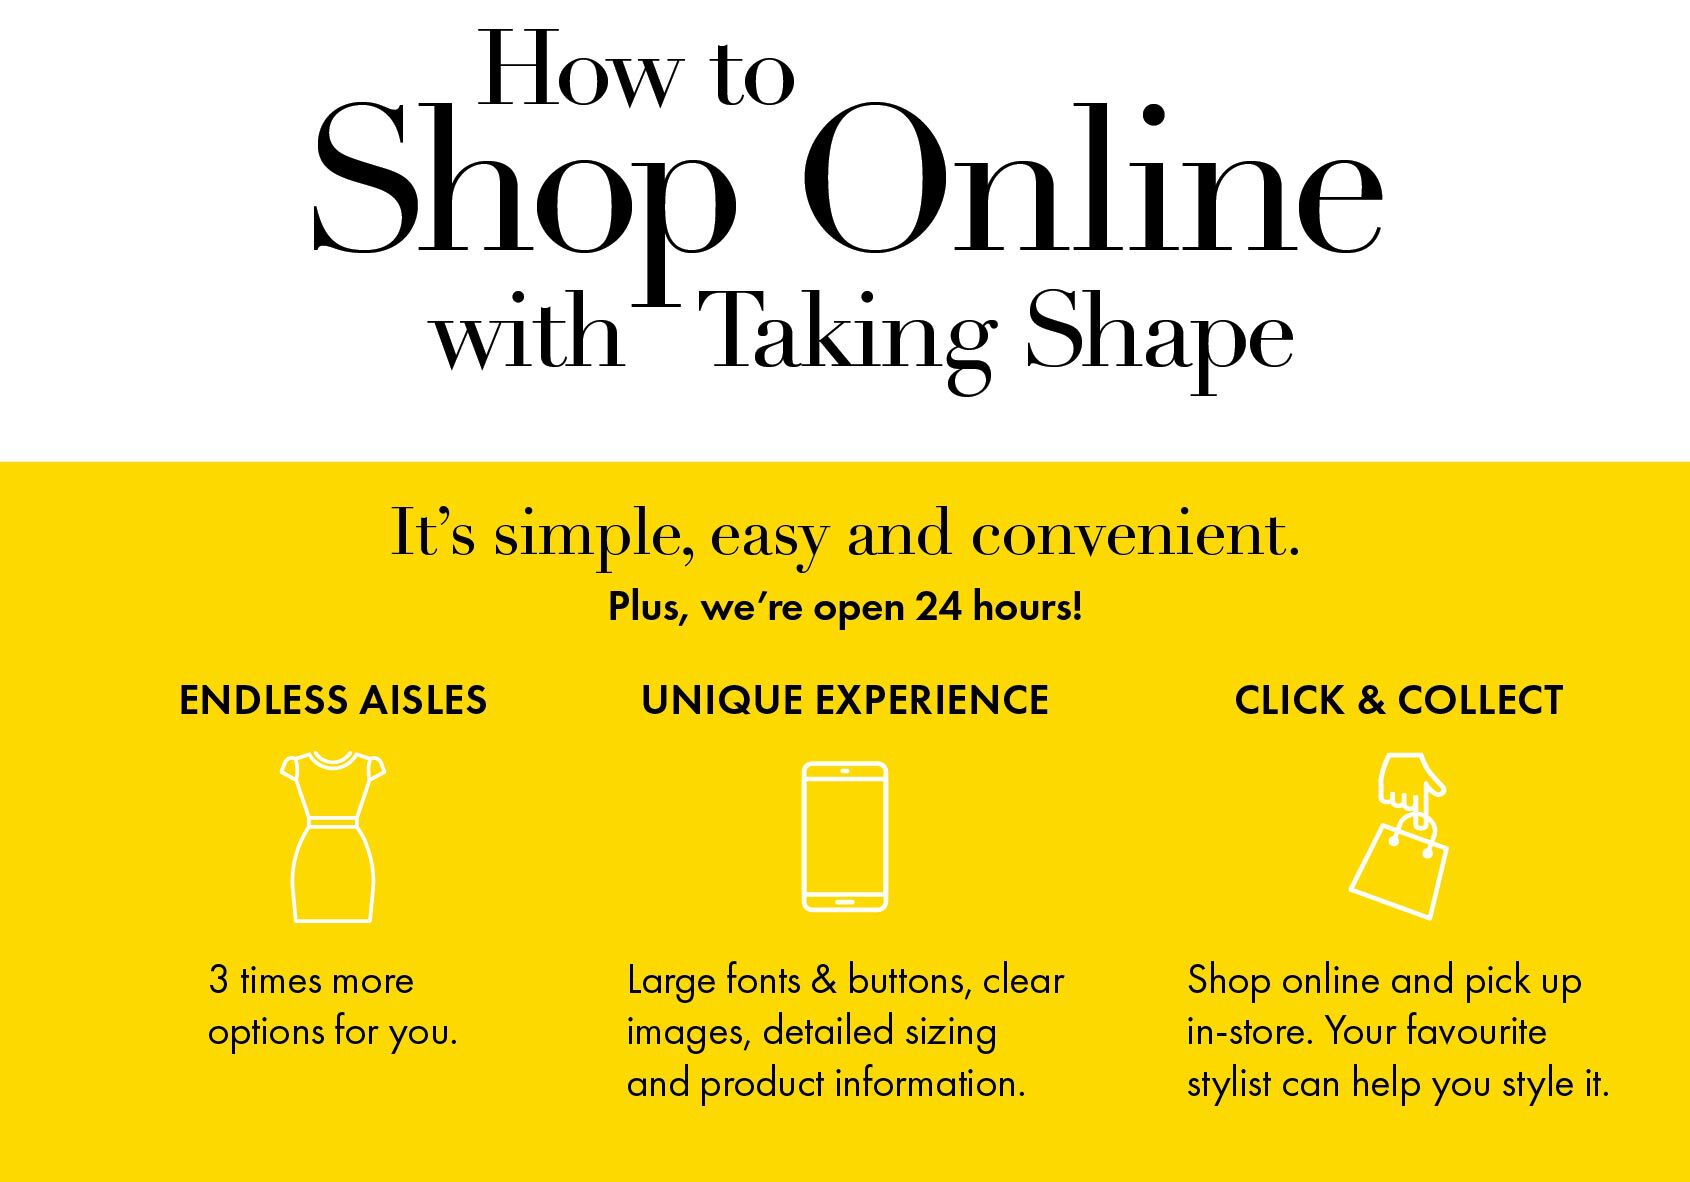 How to Shop Online with Taking Shape